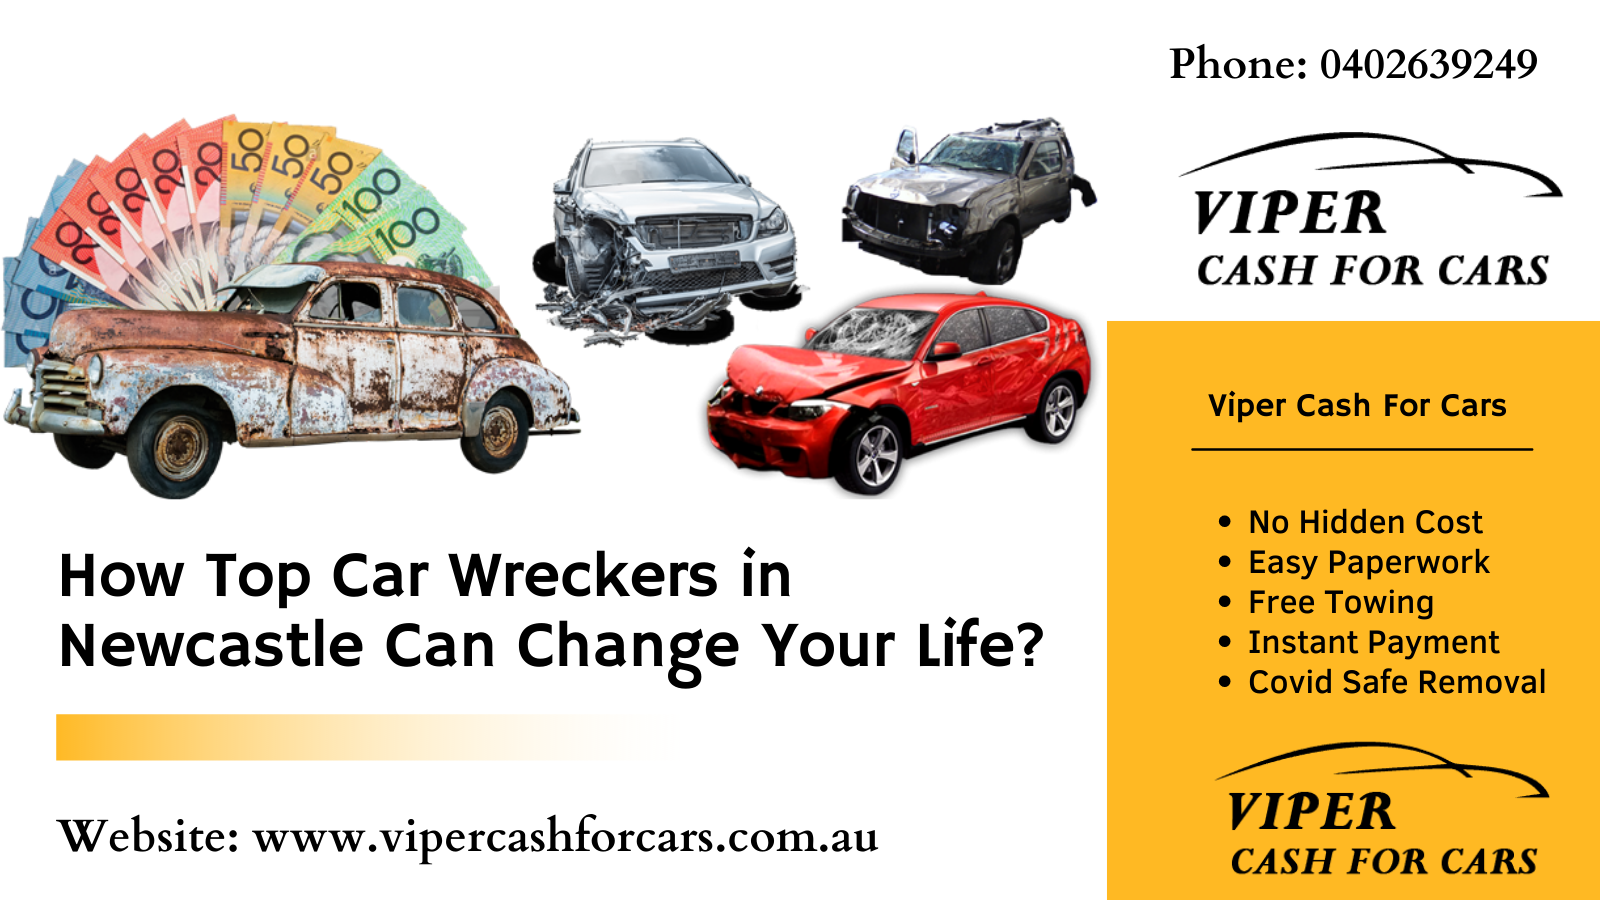 How Top Car Wreckers in Newcastle Can Change Your Life?